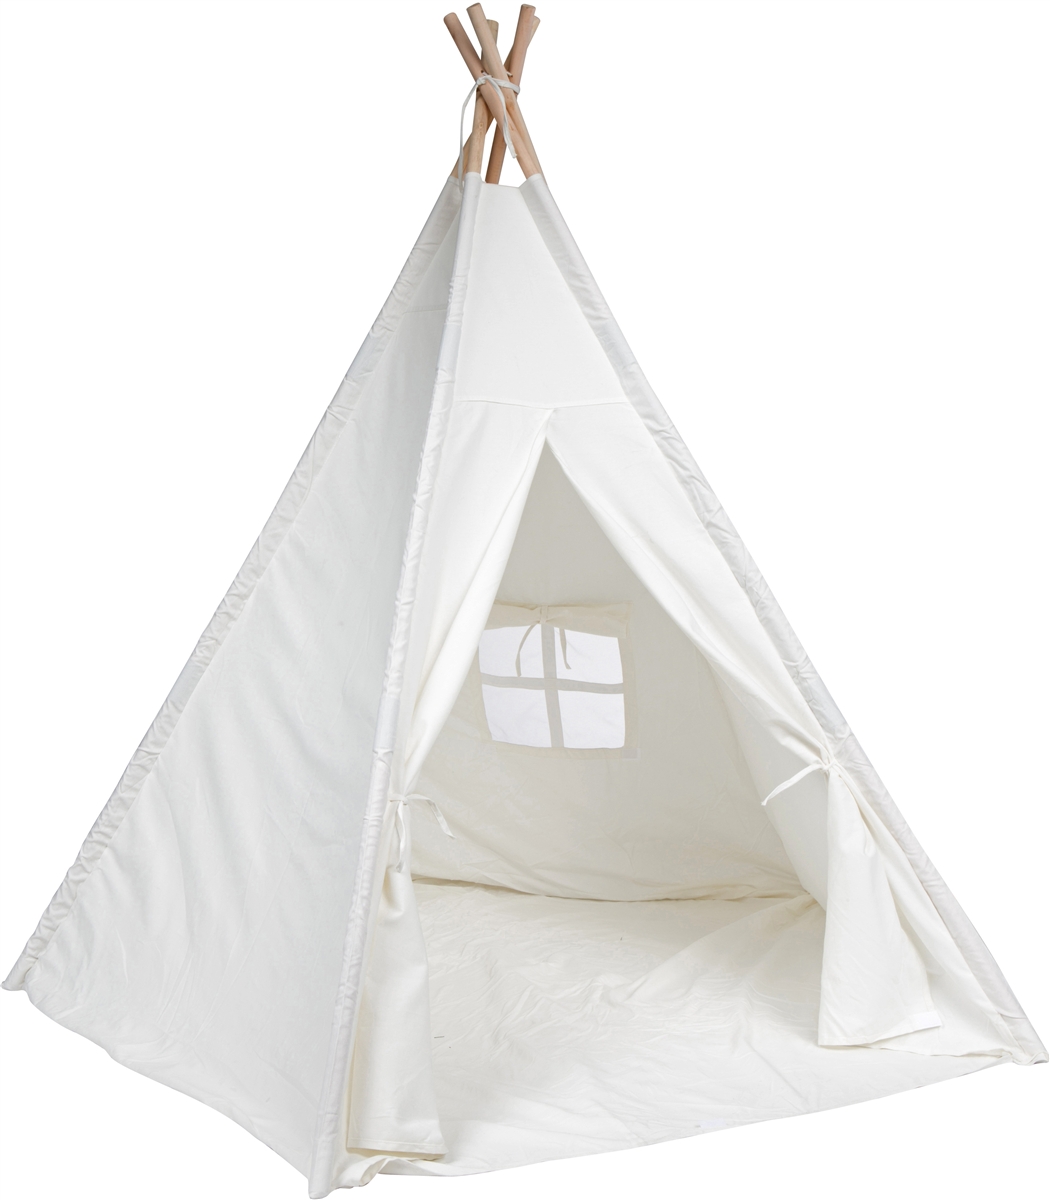 Trademark Innovations Authentic Giant White Canvas Teepee 6